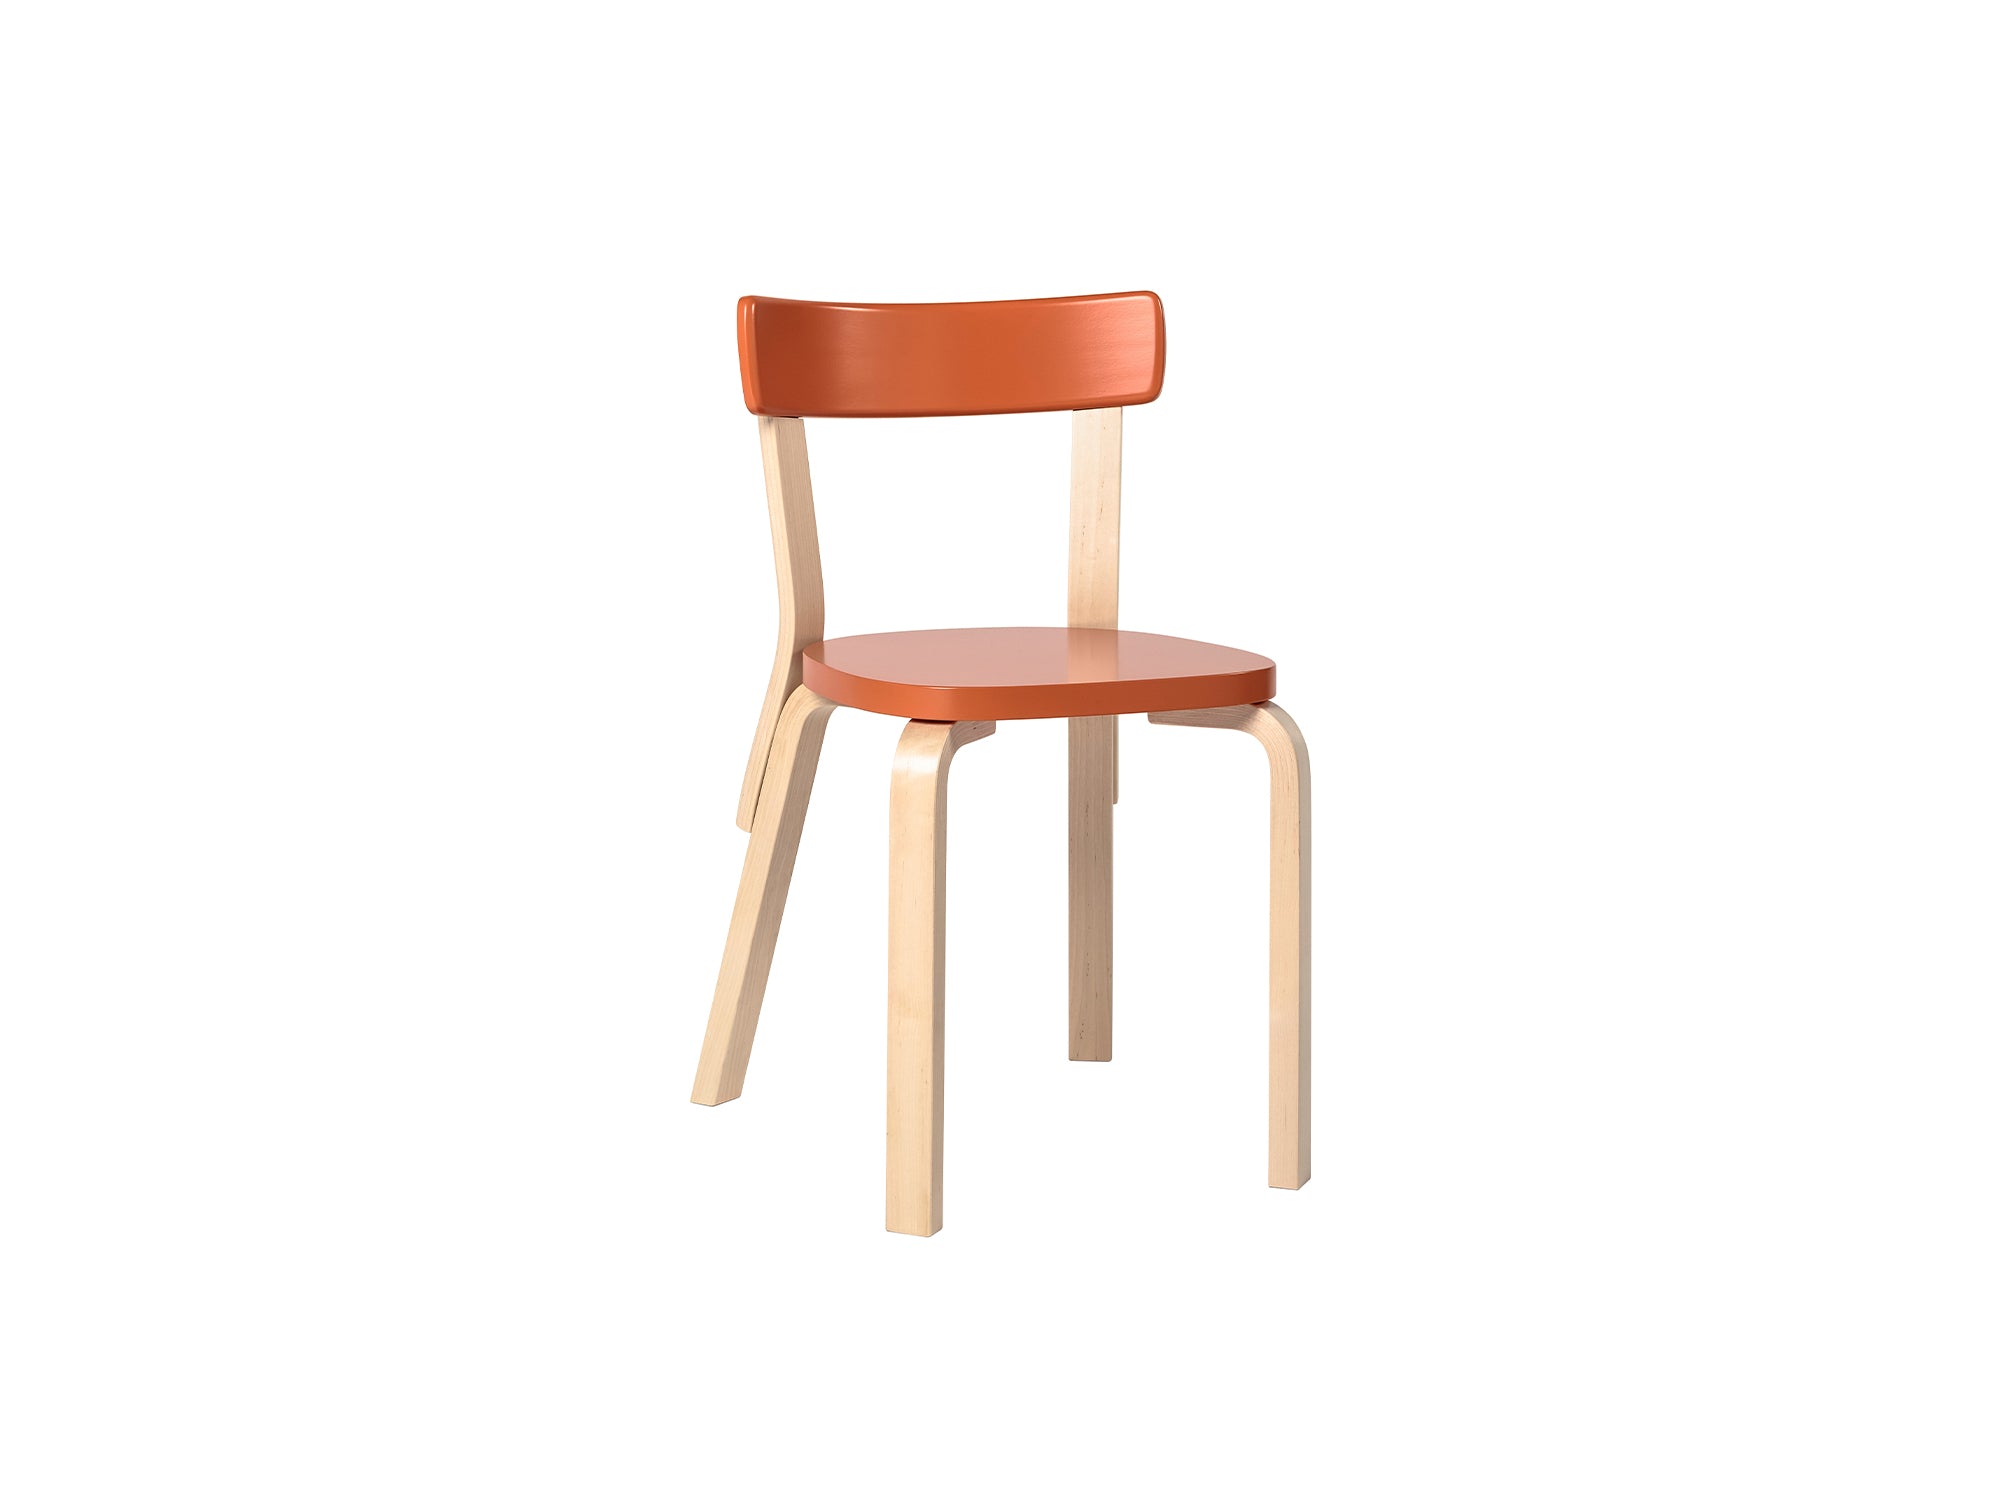 Chair 69 by Artek – Really Well Made